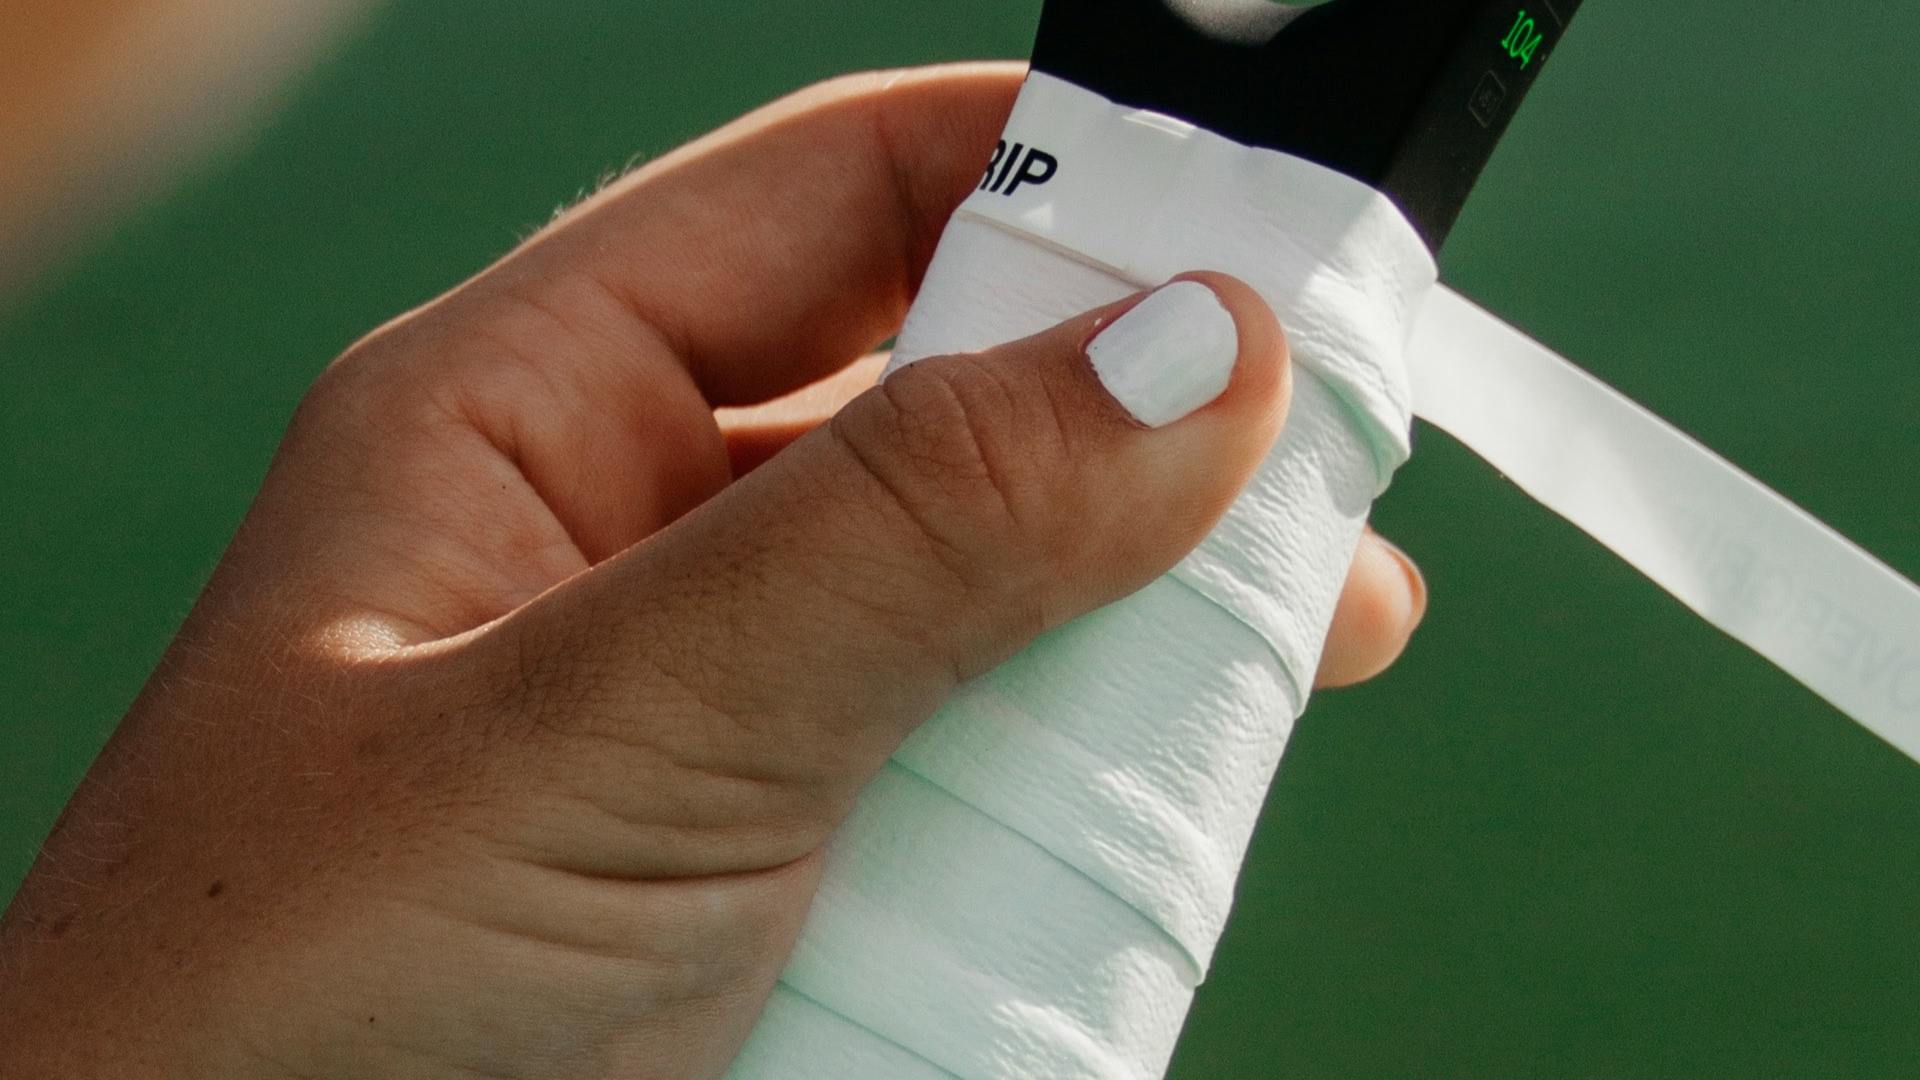 A woman wraps white grip tape around her racquet handle.